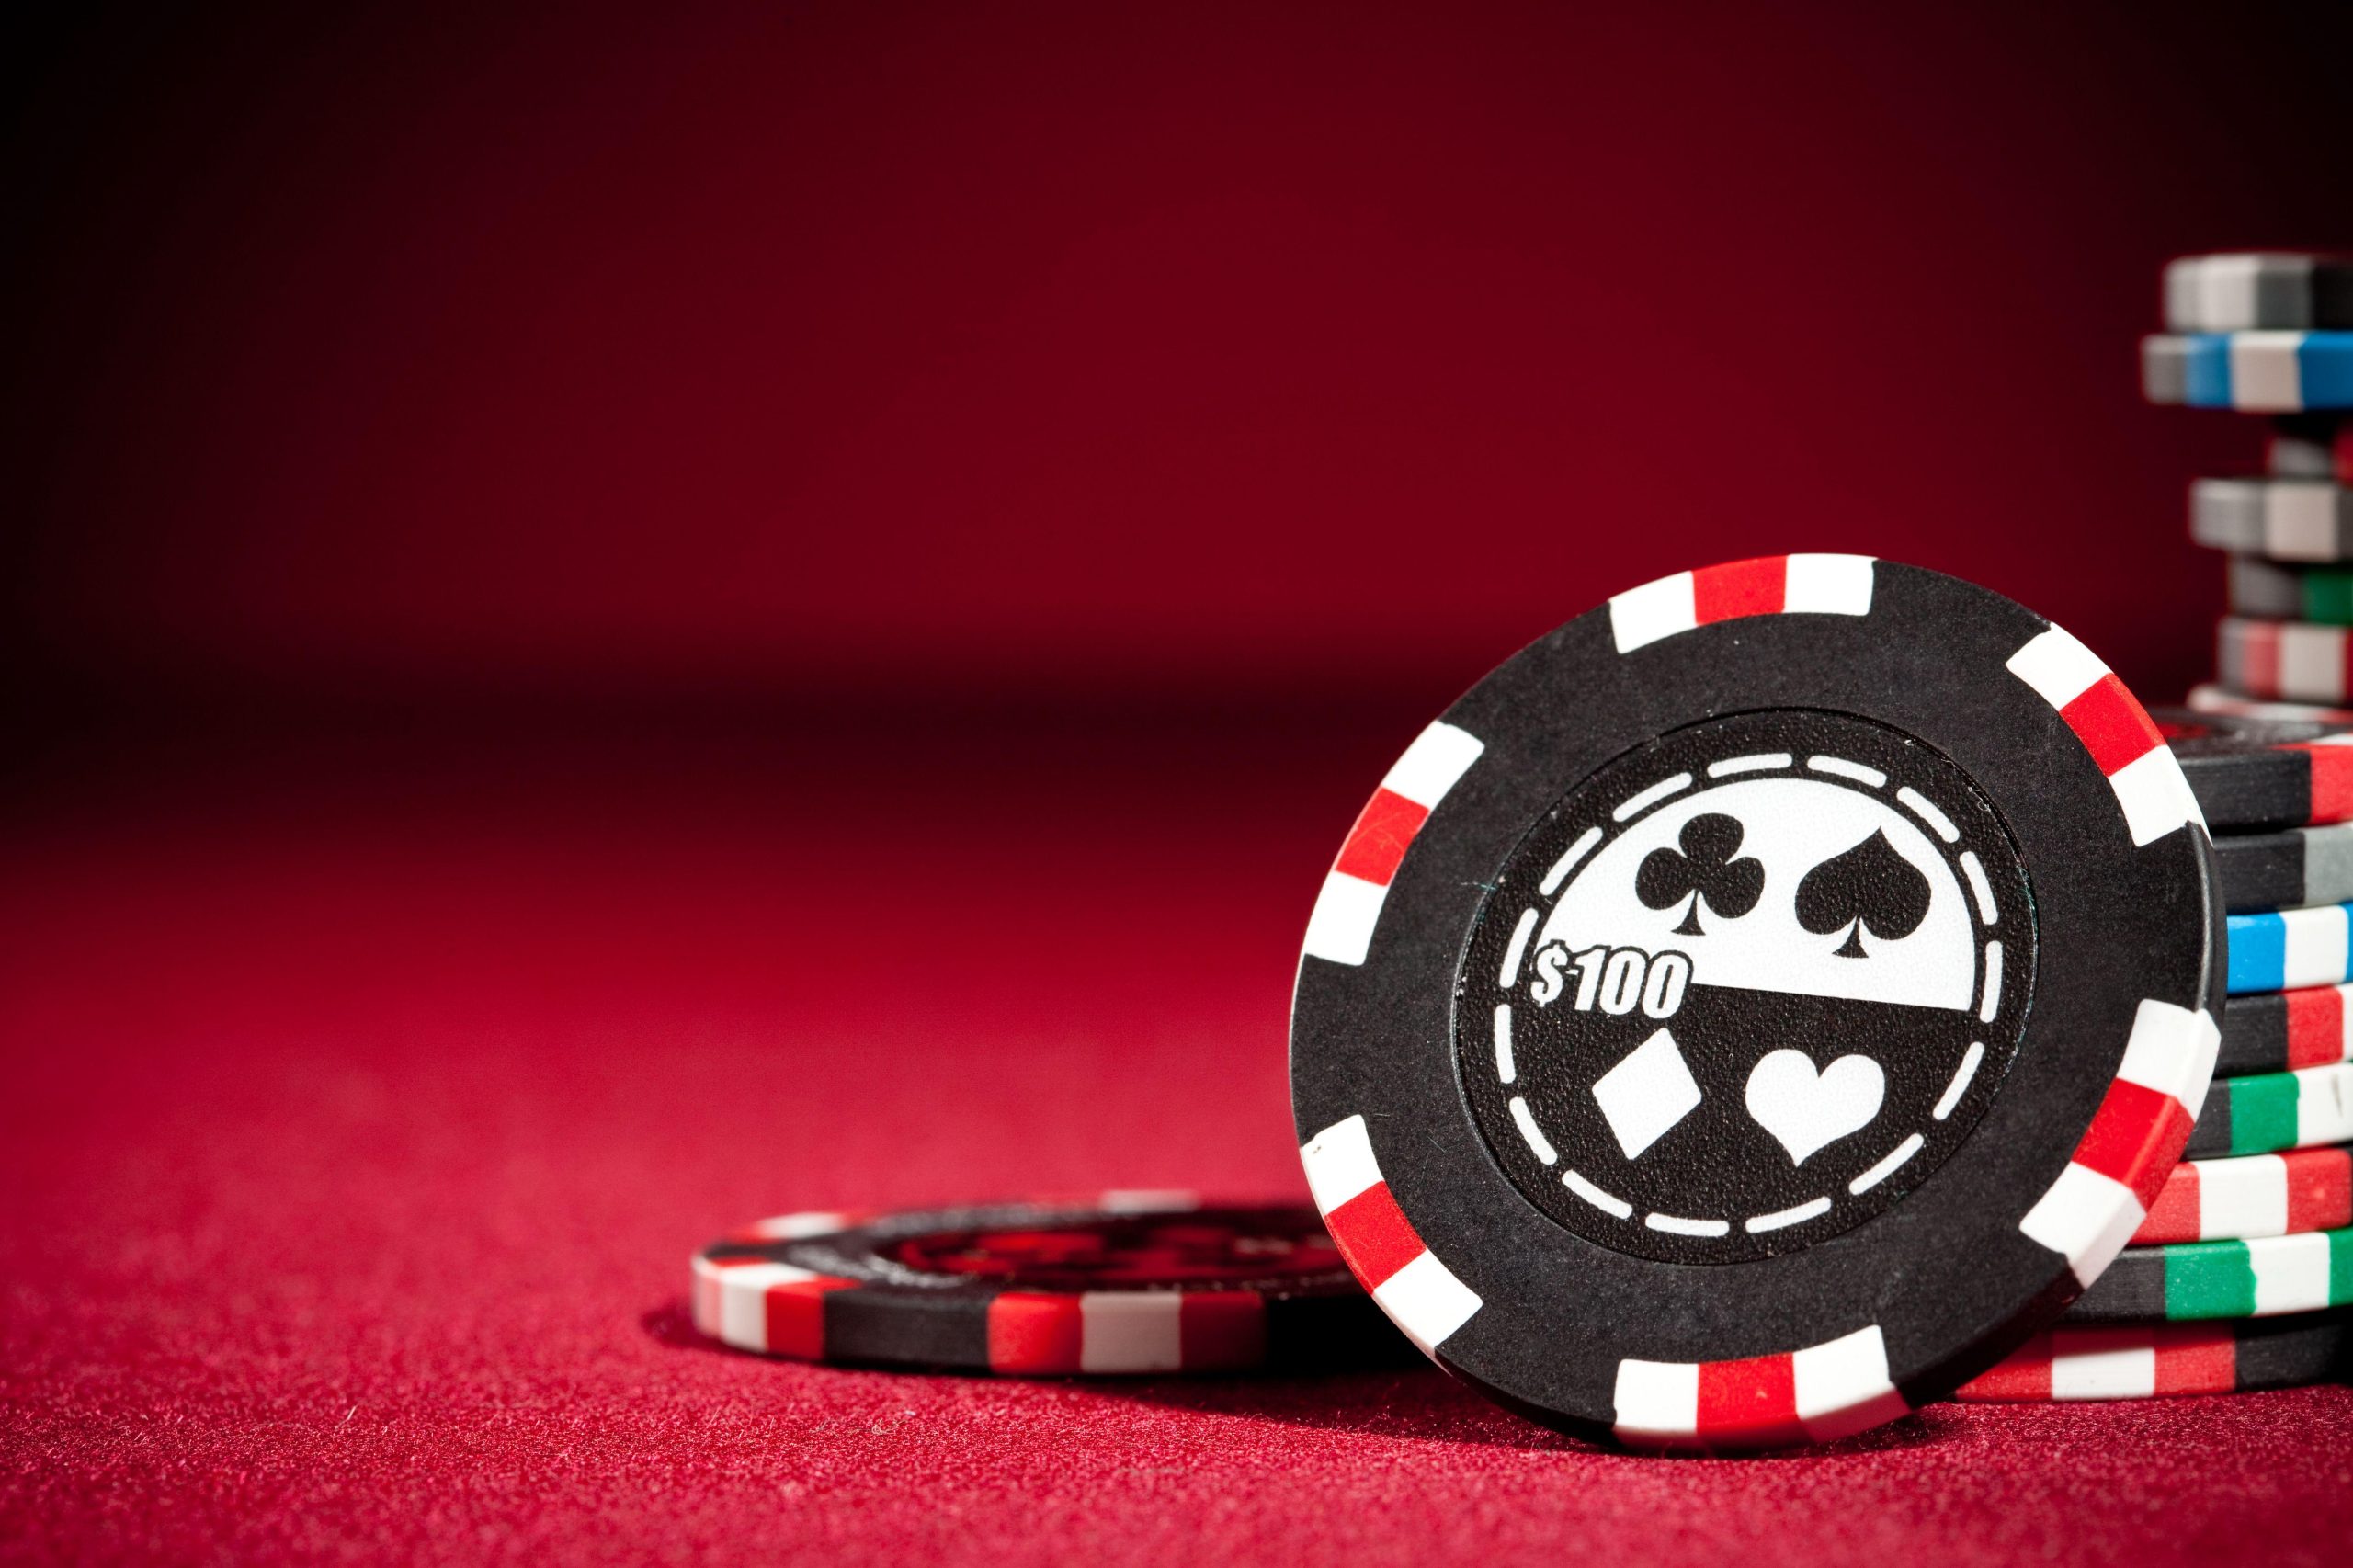 Roulette Rules: Winning Techniques for Online Roulette Games